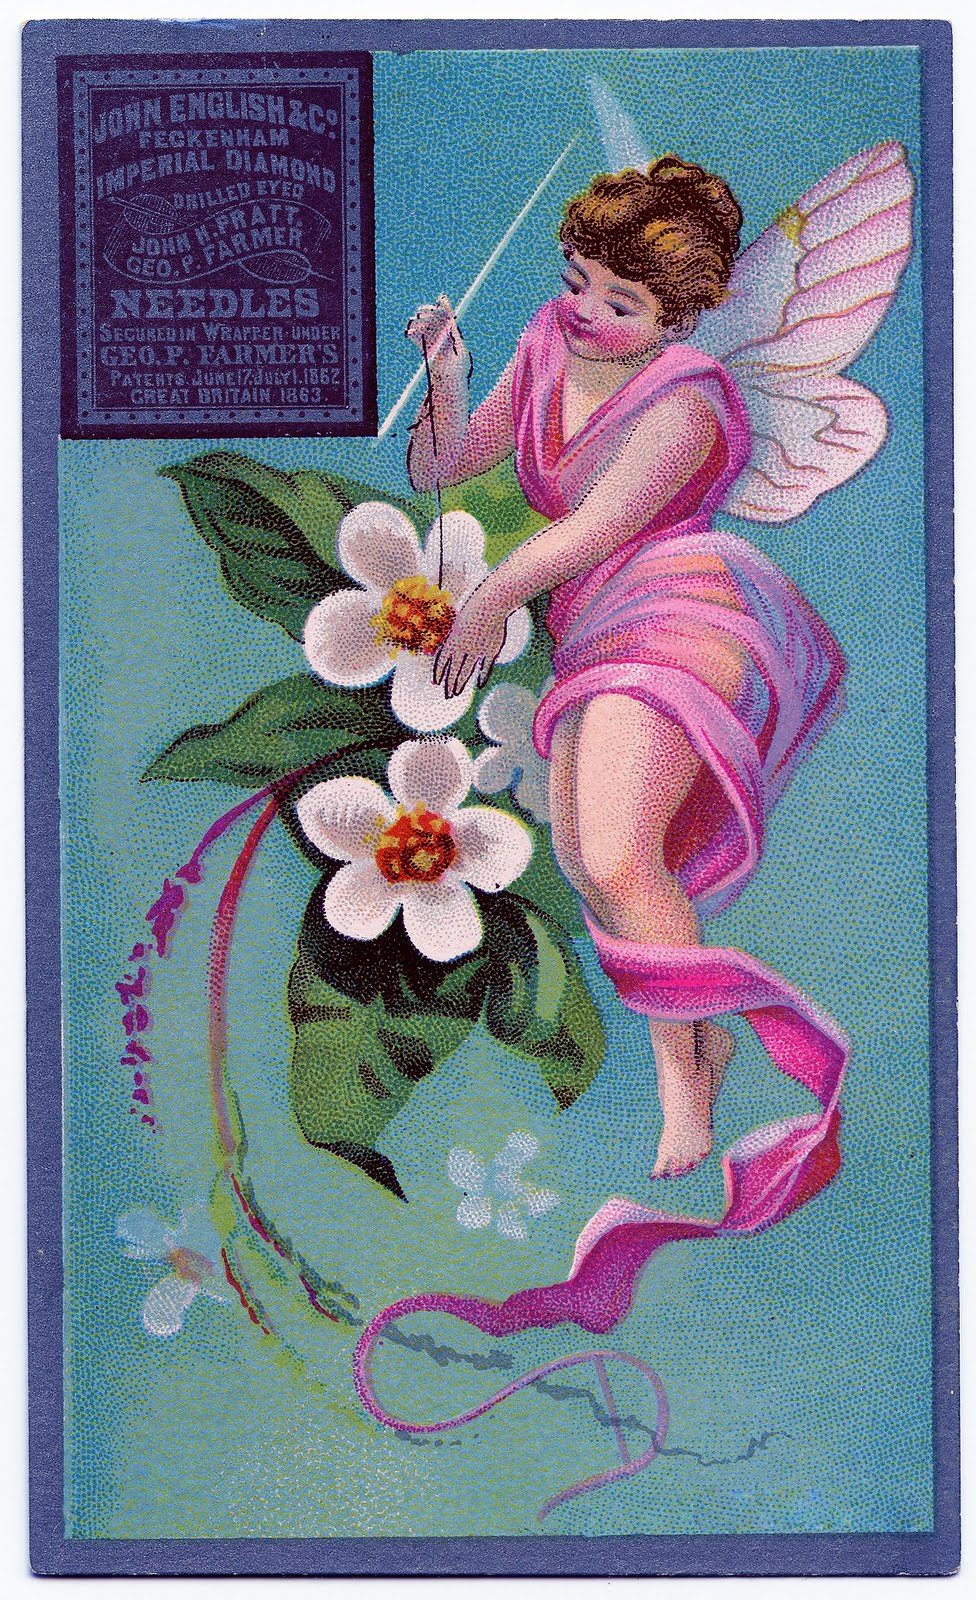 Vintage Graphic - Sewing Fairy - The Graphics Fairy